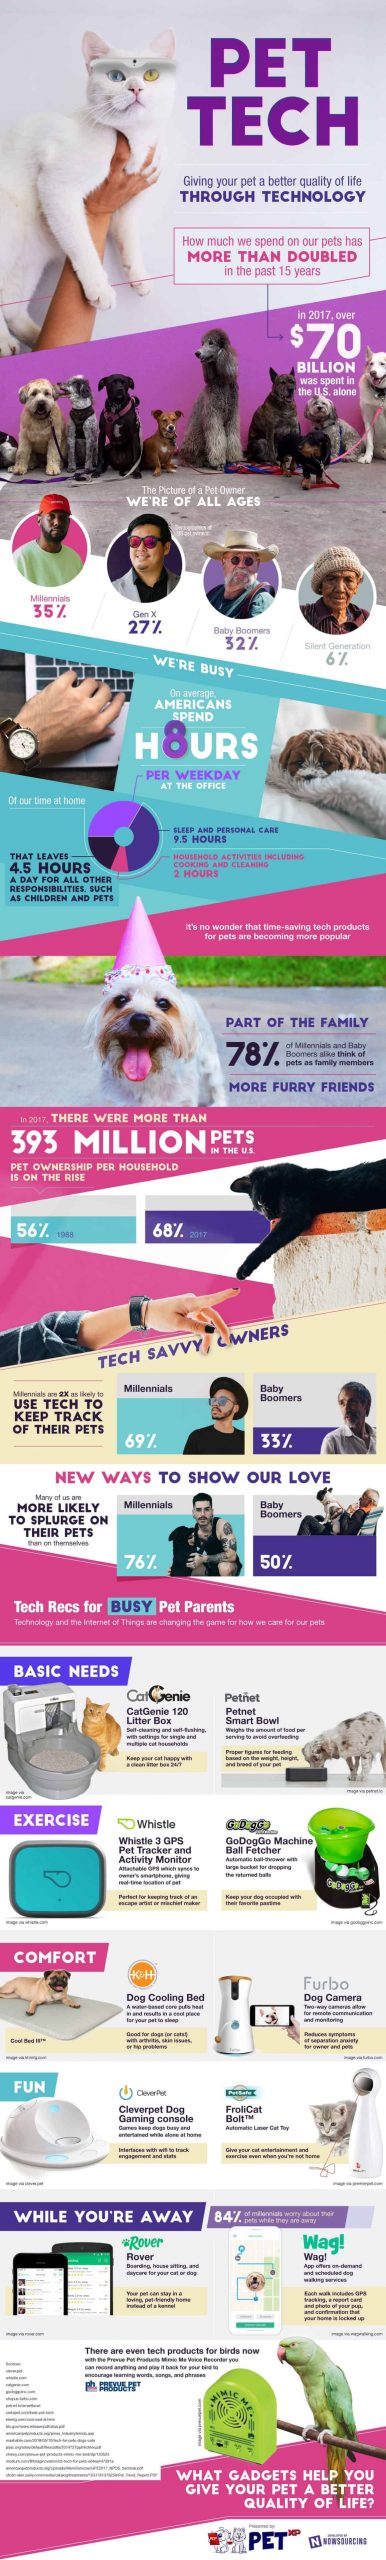 Pet Tech: Giving Your Pet A Better Quality Of Life Through Technology